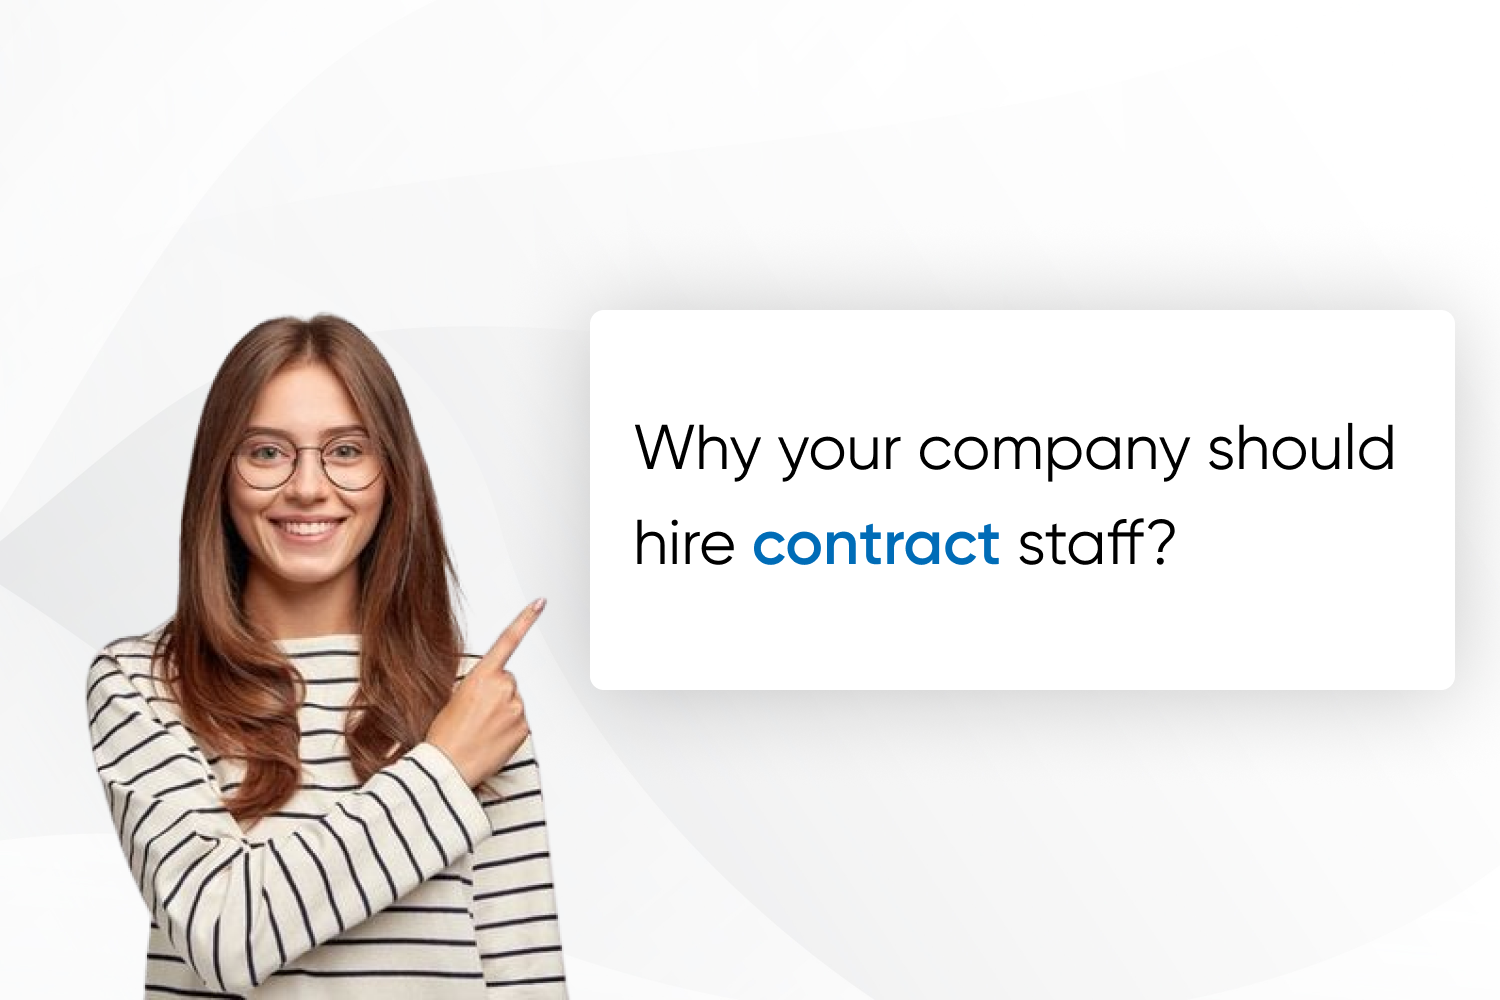 Why your company should hire contract staff?